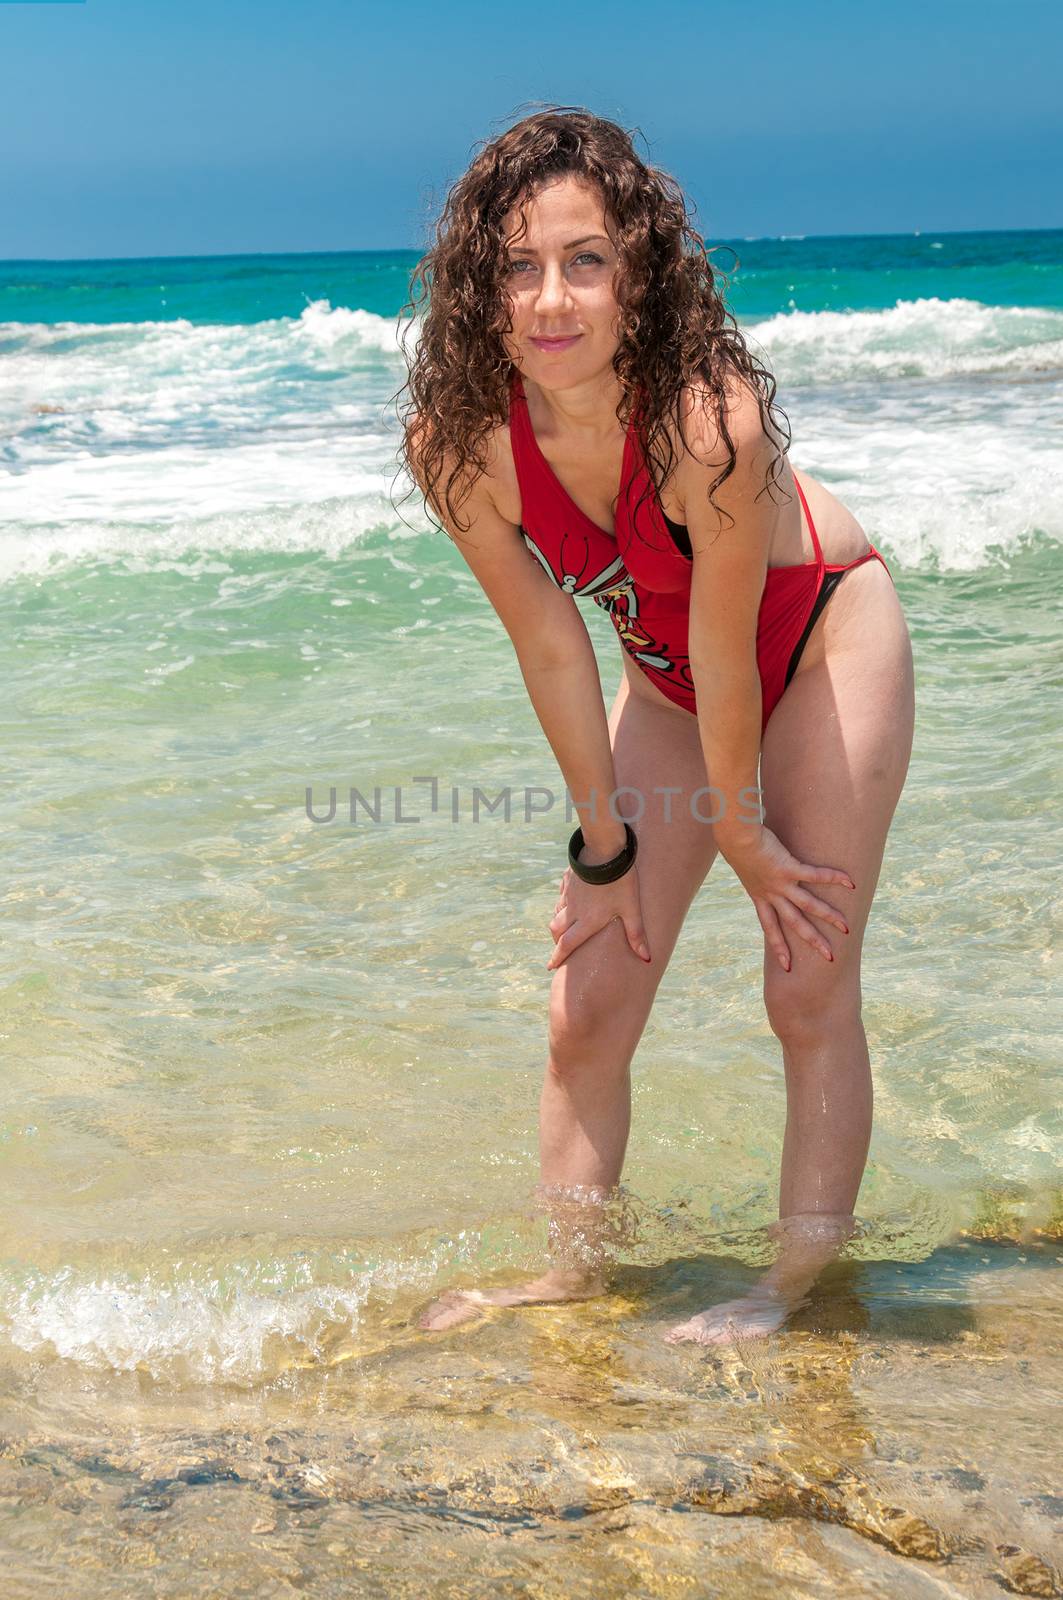 The girl, with her hair down, fooling around and teasing the photographer, standing in the sea in a beautiful, red bathing suit